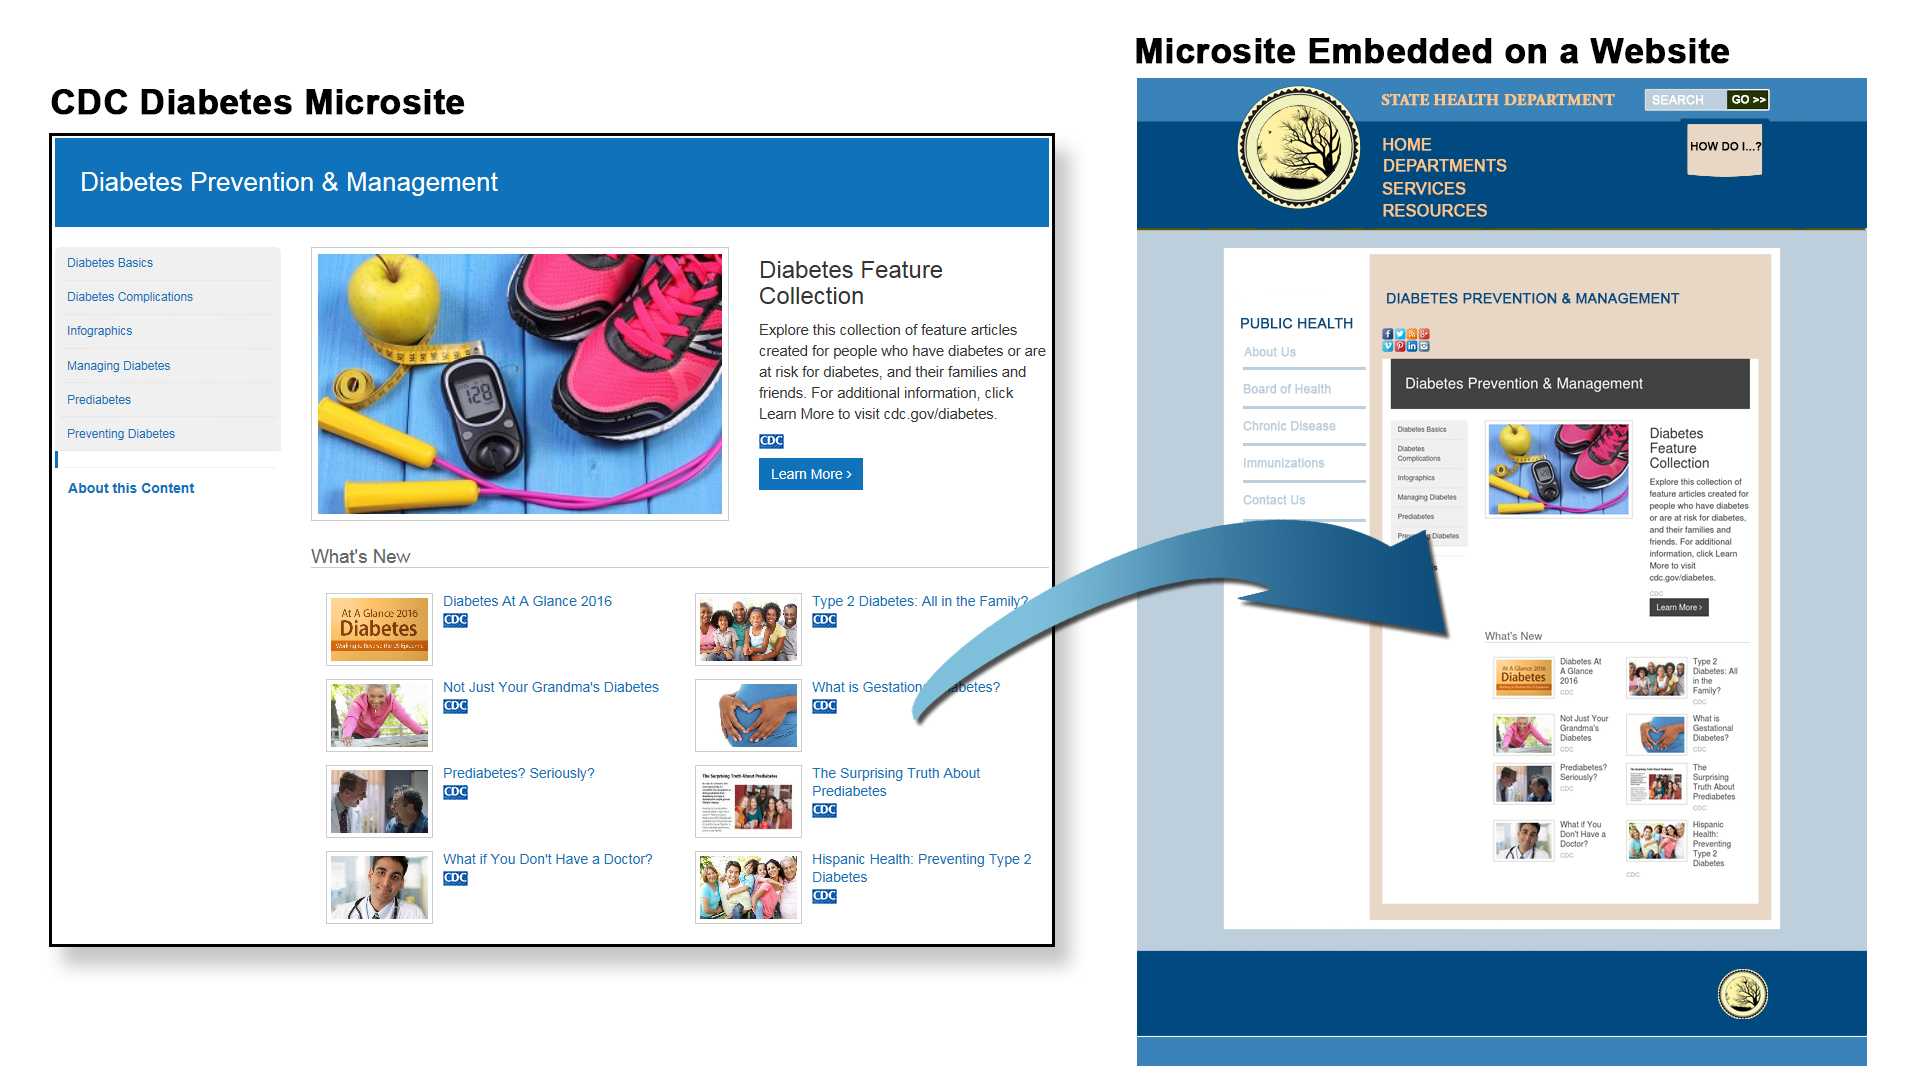 DDT Microsite embedded on a website